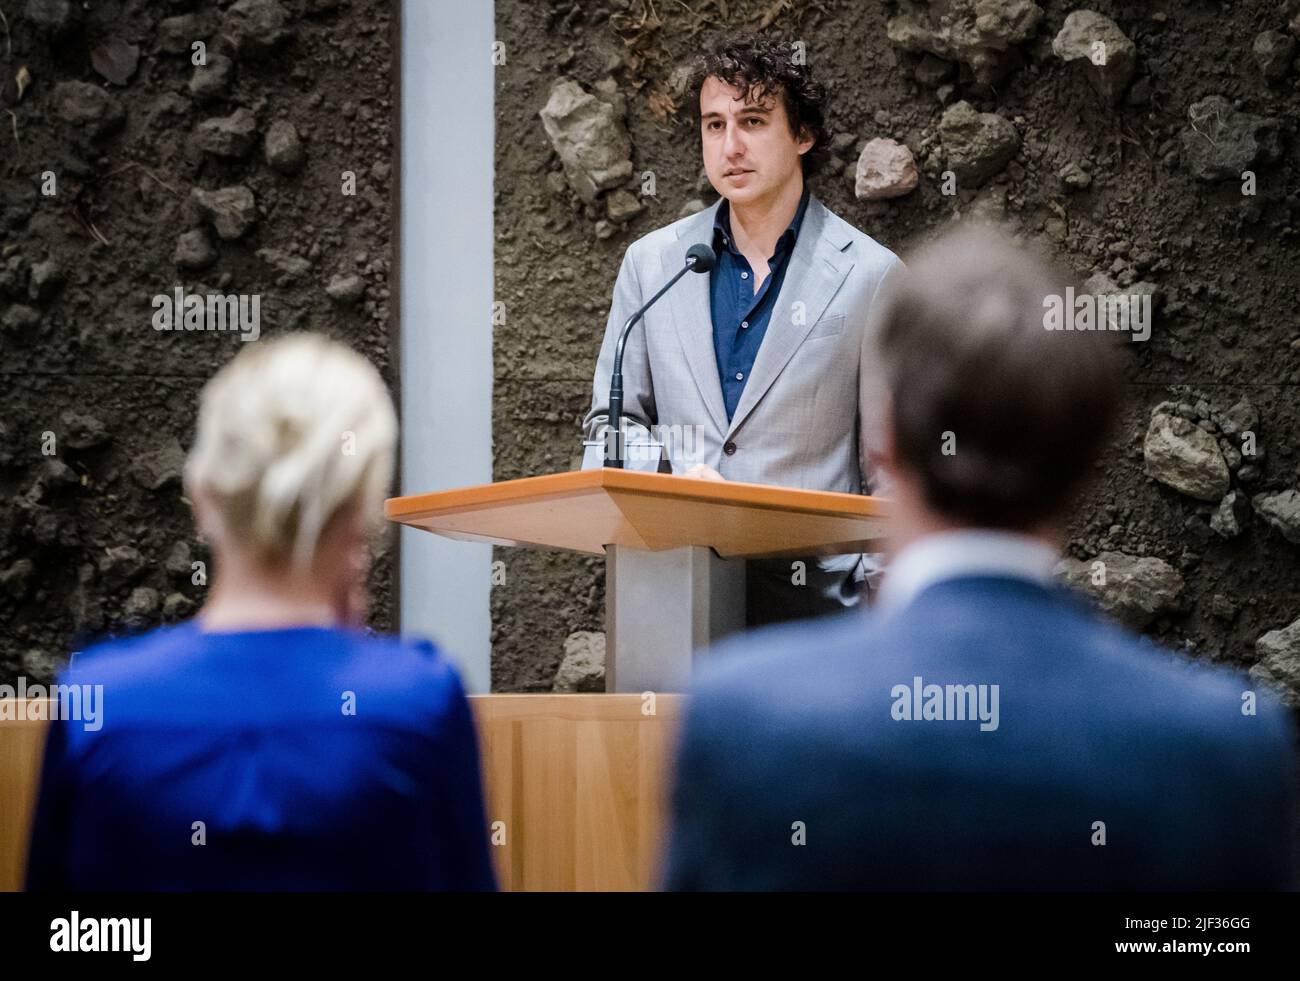 2022-06-29 11:13:55 THE HAGUE - Jesse Klaver (Groenlinks), during an extra regulation of activities in the House of Representatives. A majority of the House wants an emergency debate about the farmers' protests. ANP BART MAAT netherlands out - belgium out Stock Photo